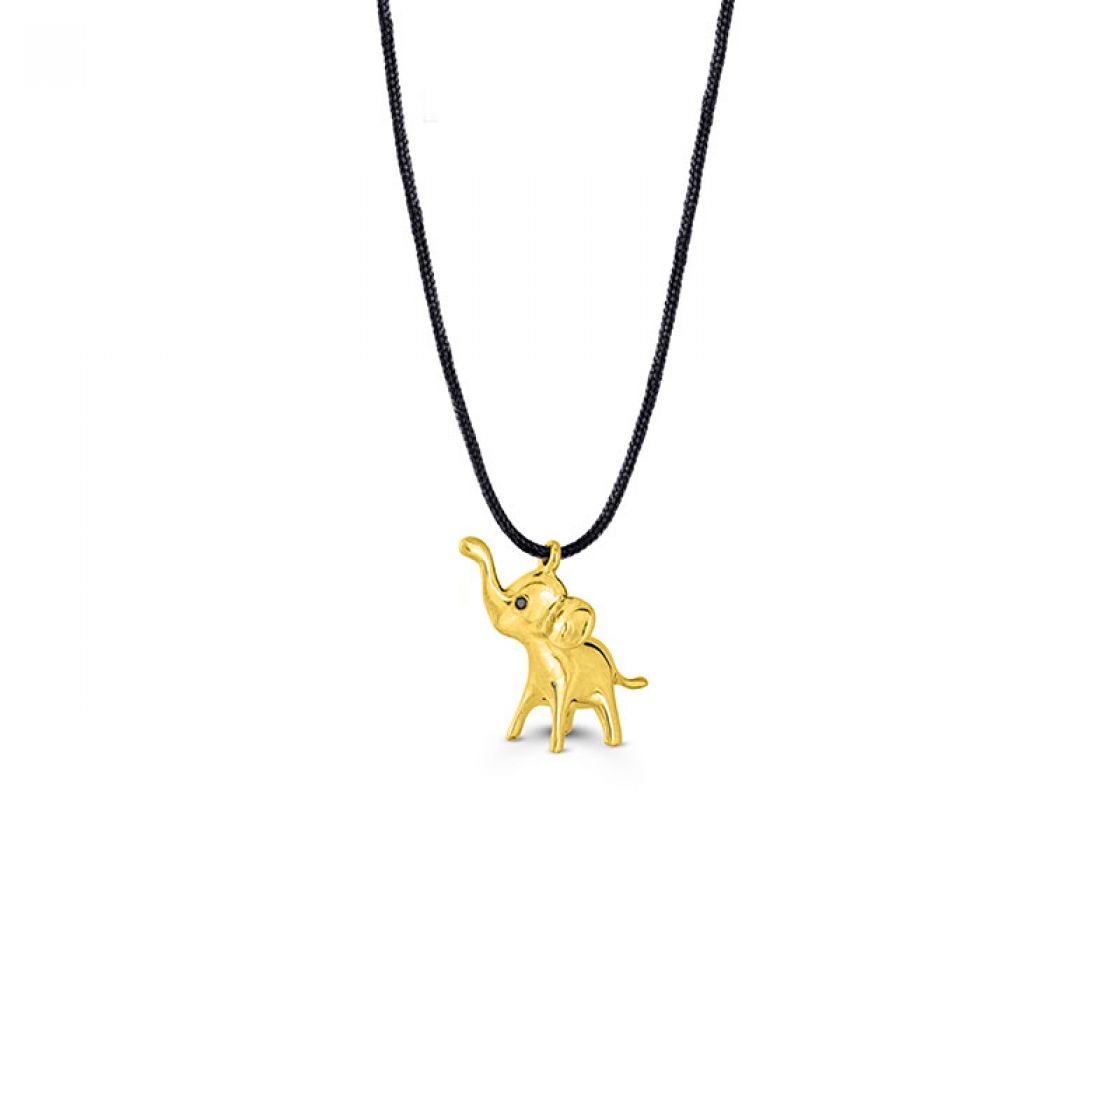 Like a miniature sculpture, this little cute Elephant pendant, will steal your heart away.